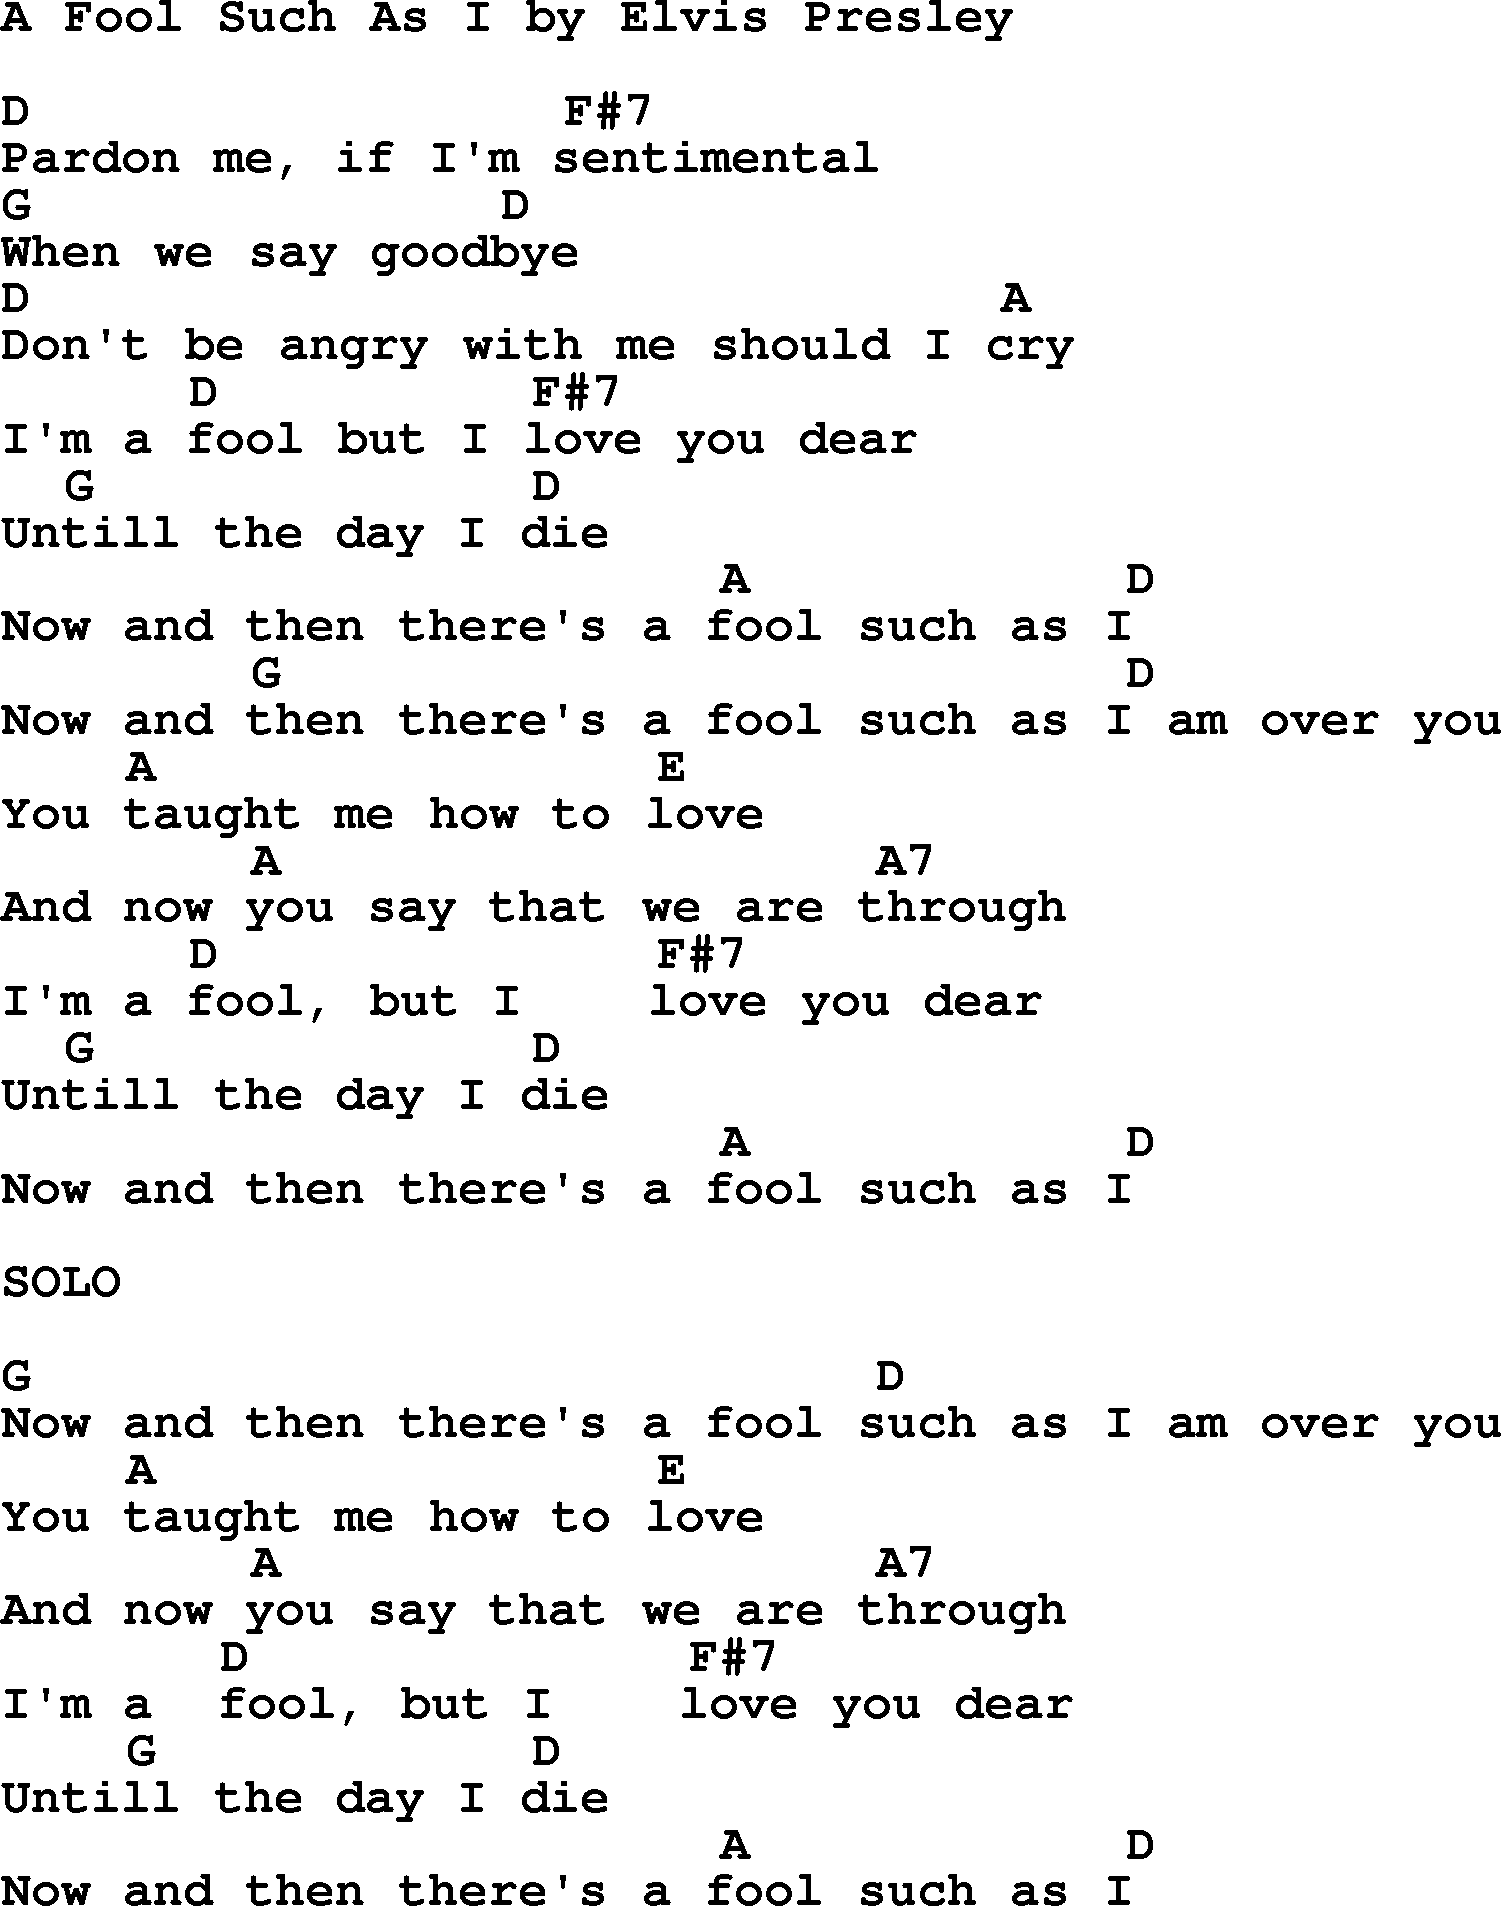 Elvis Presley song: A Fool Such As I, lyrics and chords